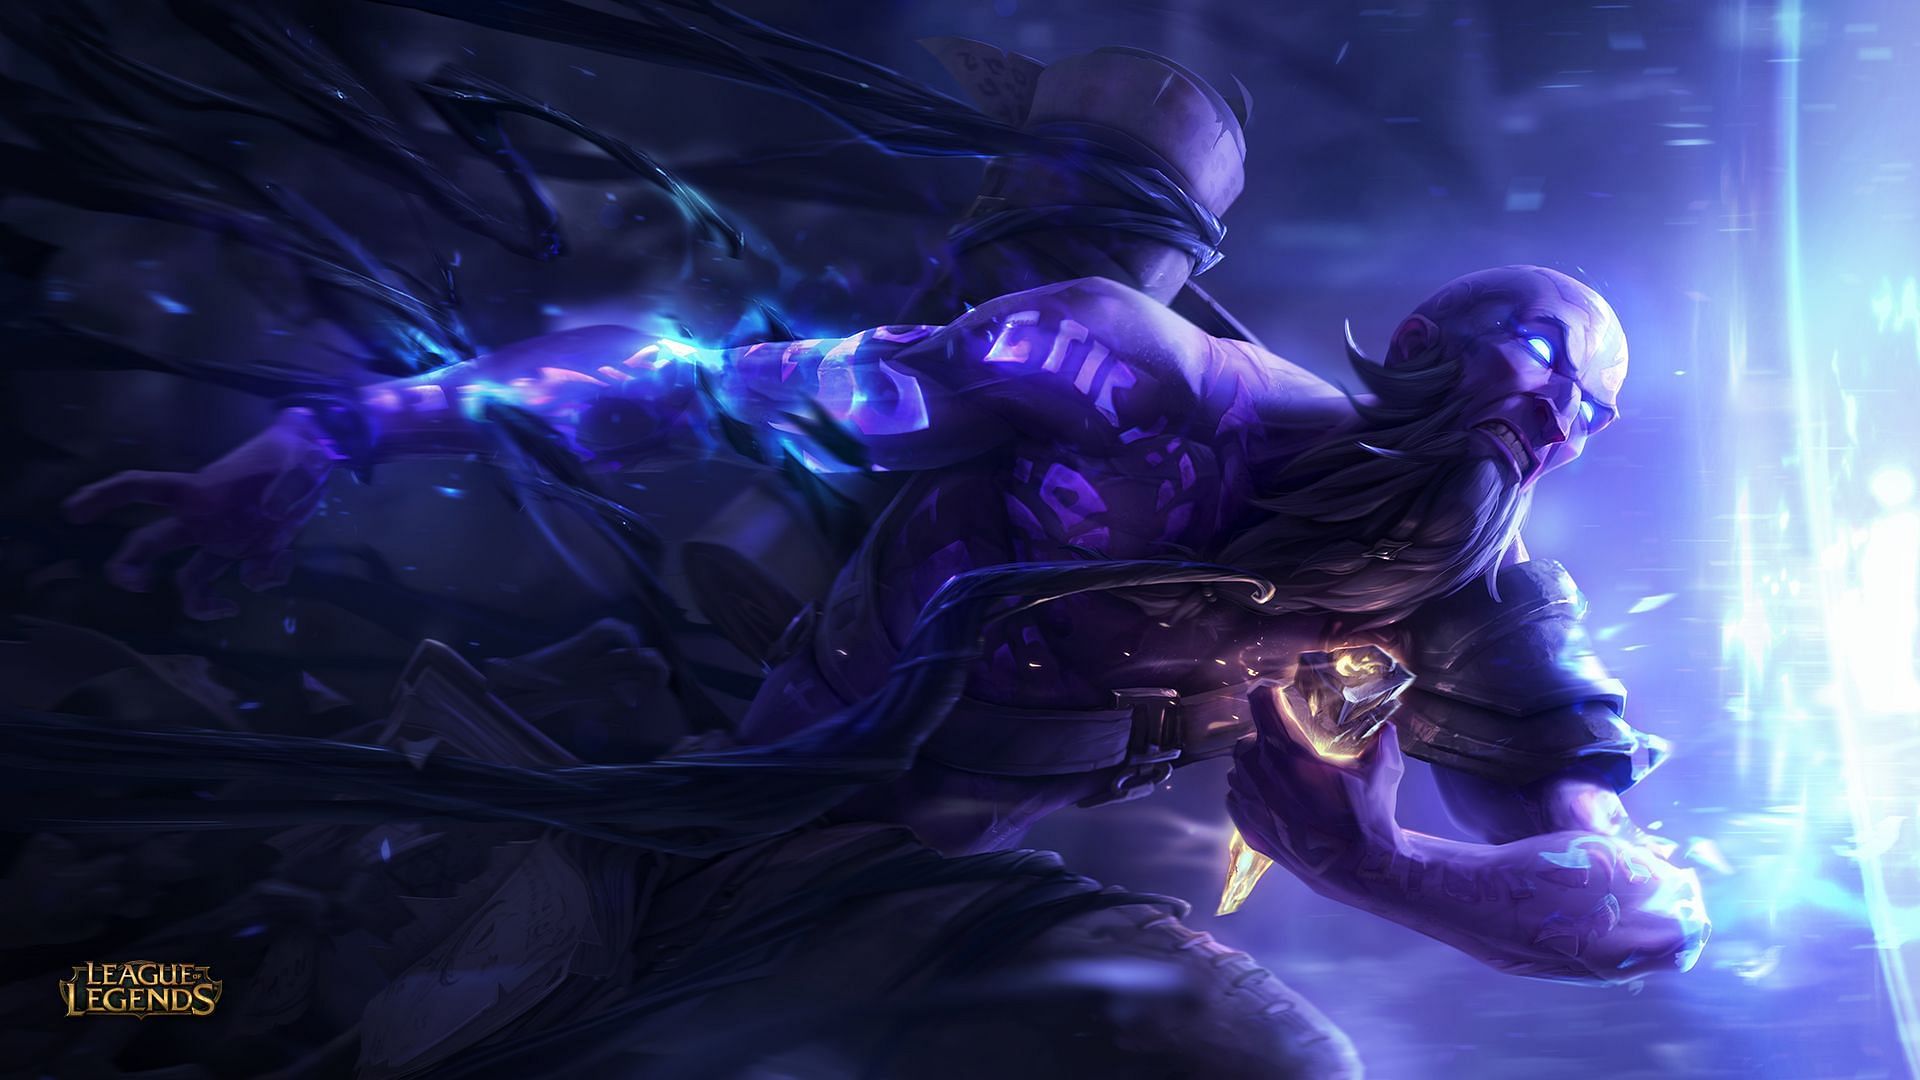 Champions like Ryze will benefit a lot from Crown of the Shattered Queen (Image via League of Legends)